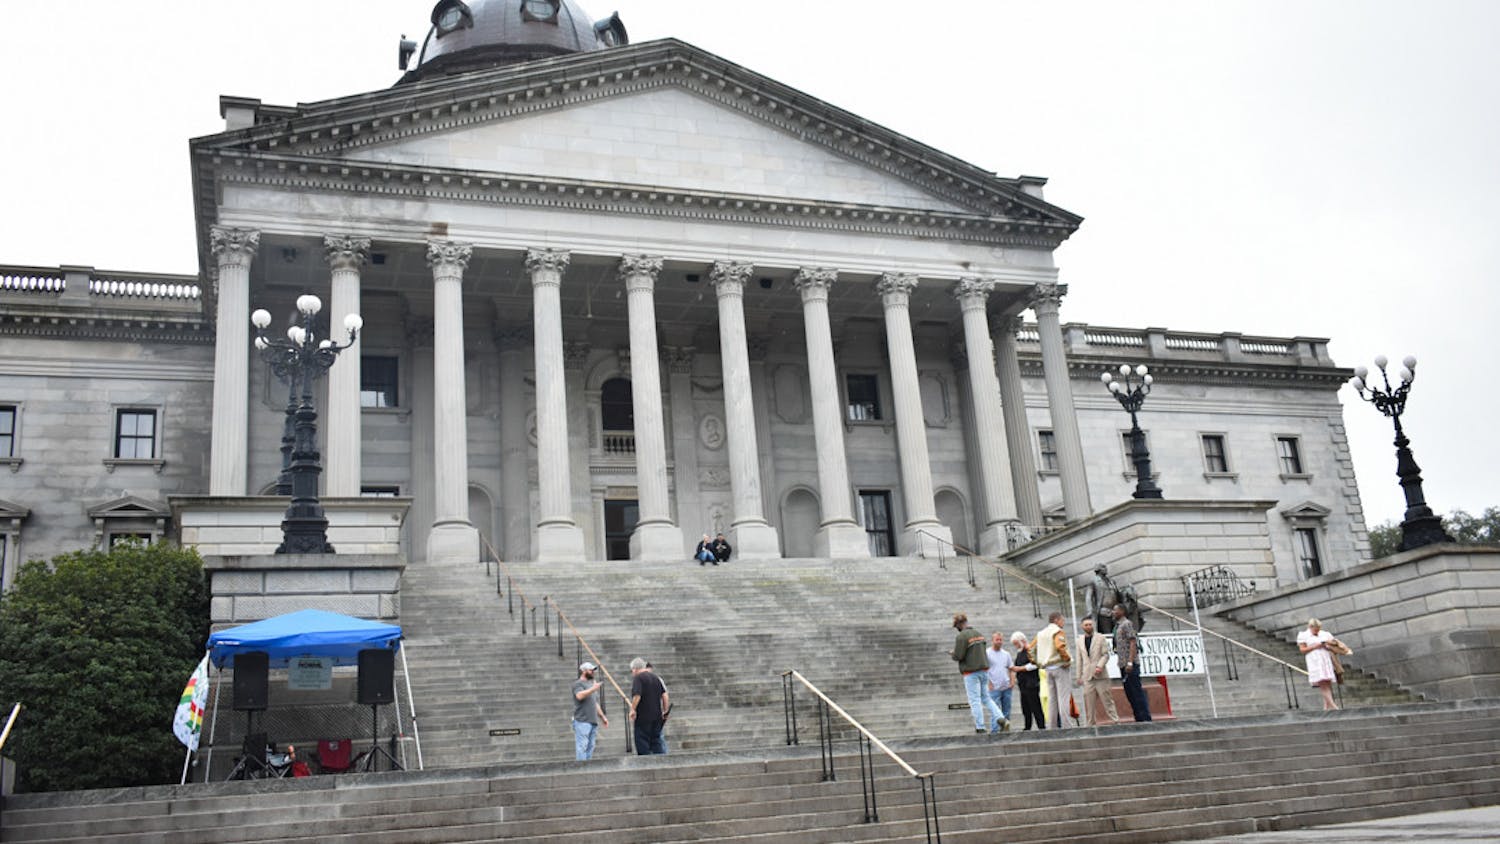 South Carolina NORML held a protest for reforming the state's cannabis laws on Feb. 17, 2023. The protest was held outside of the South Carolina Statehouse. where parodies of famous songs and calls of "free marijuana information" could be heard.